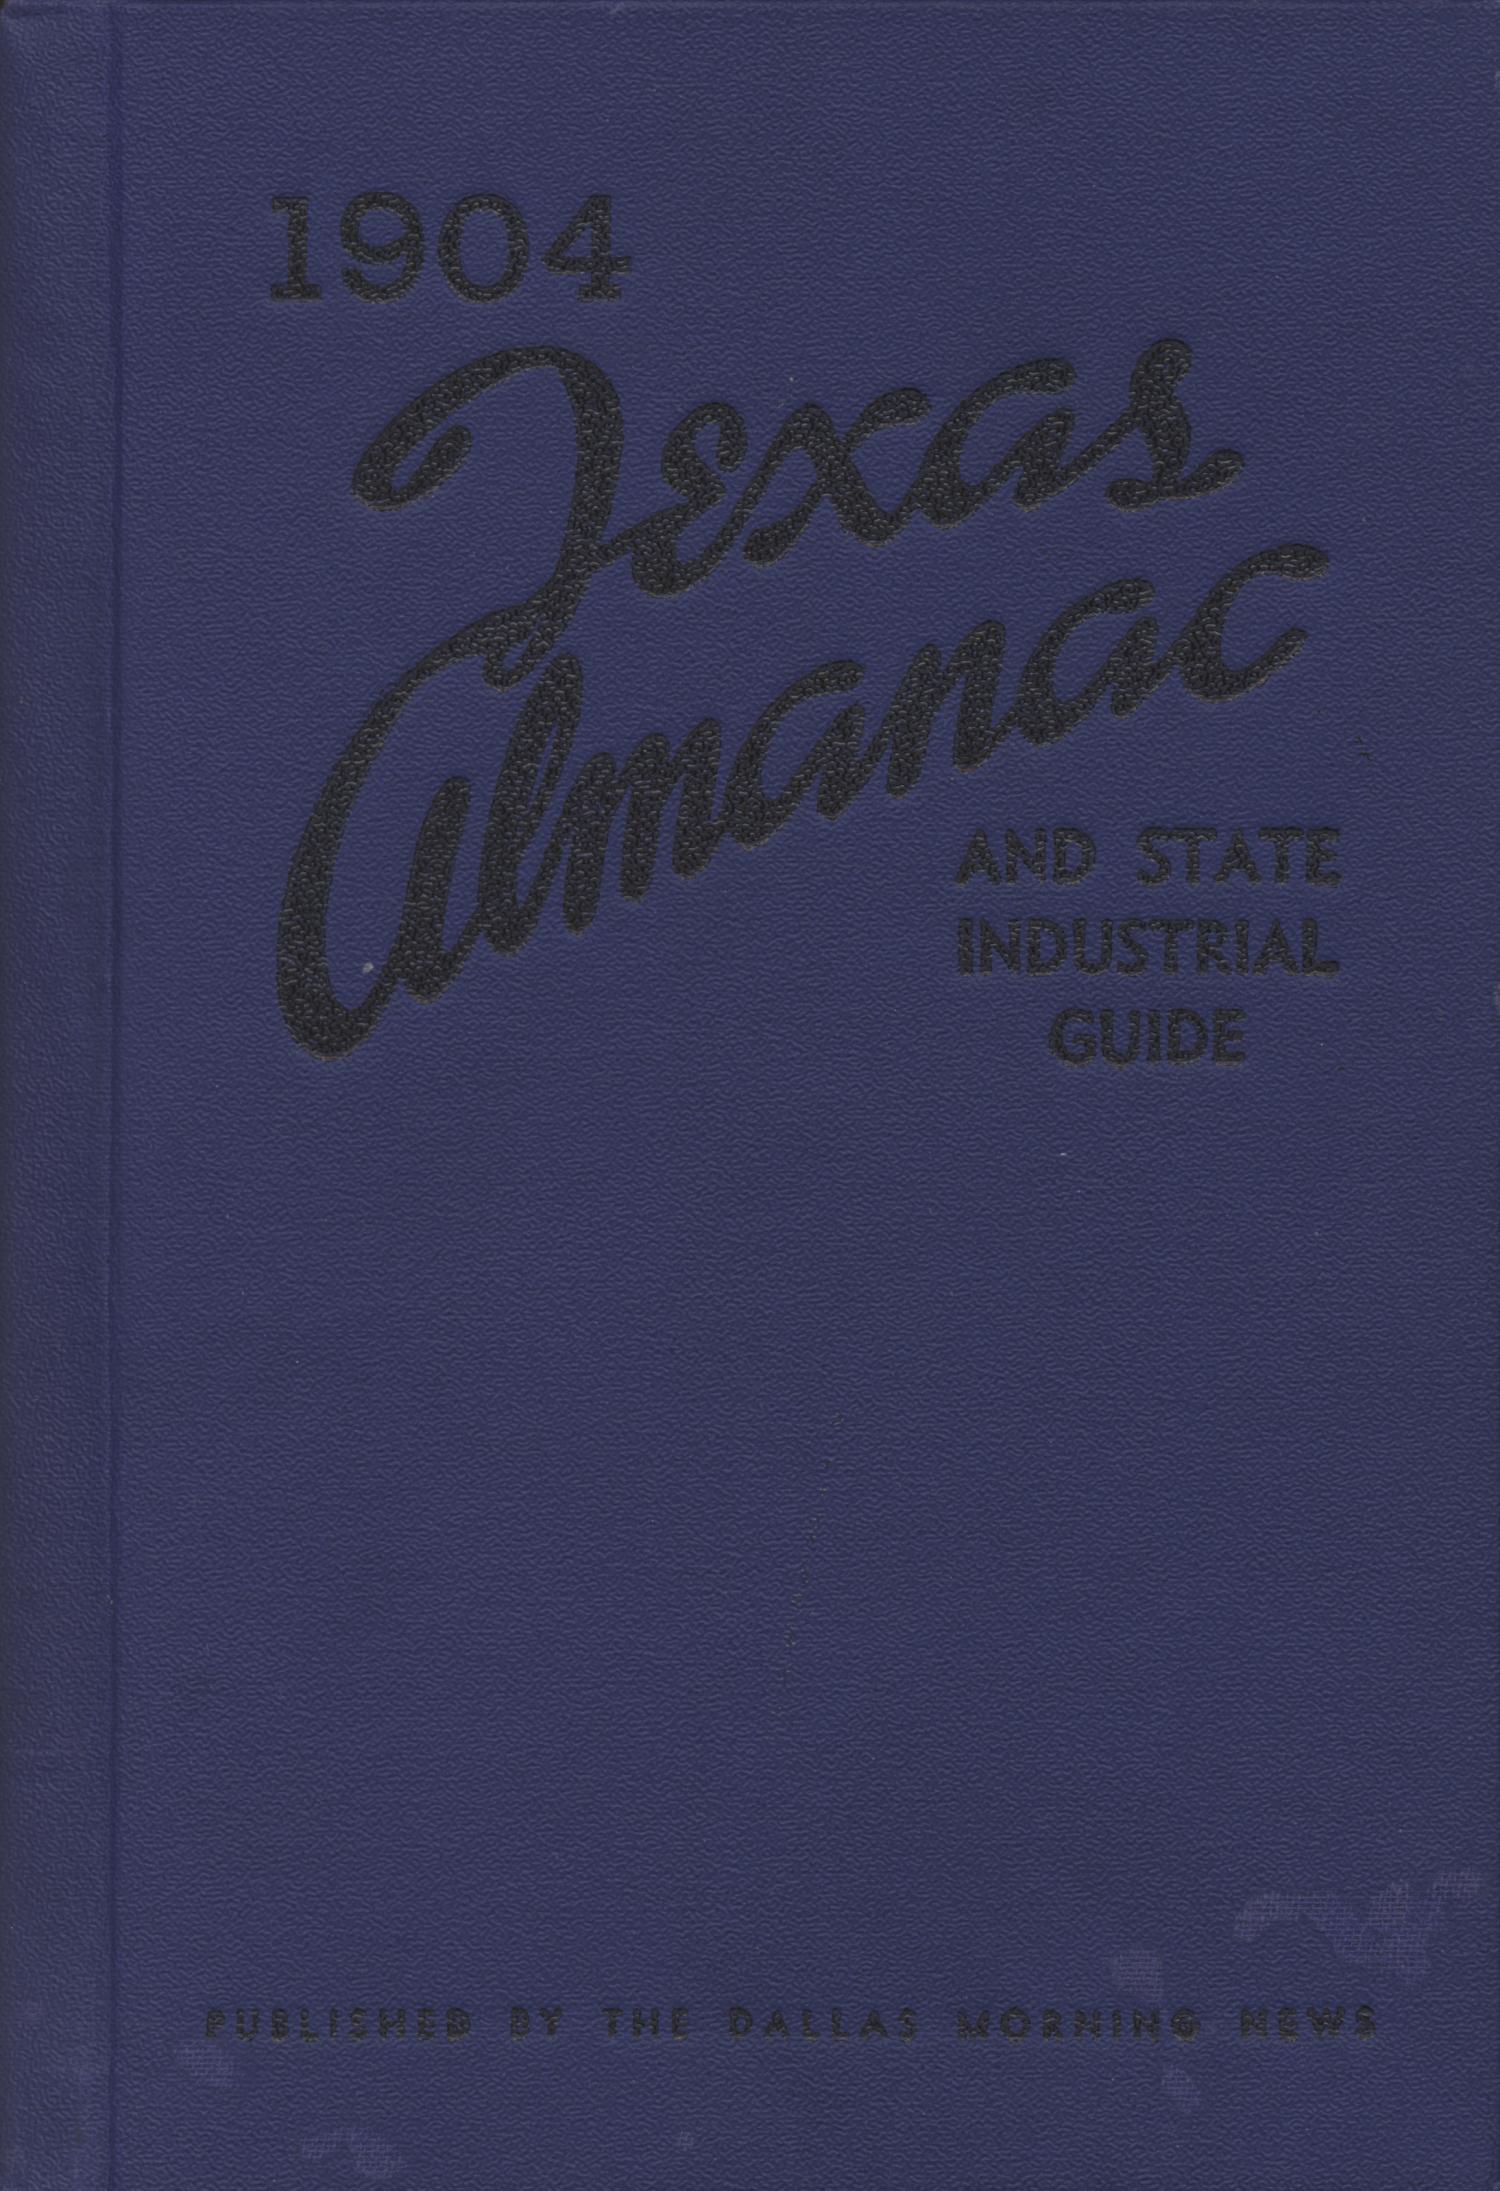 Texas Almanac and State Industrial Guide for 1904
                                                
                                                    Front Cover
                                                